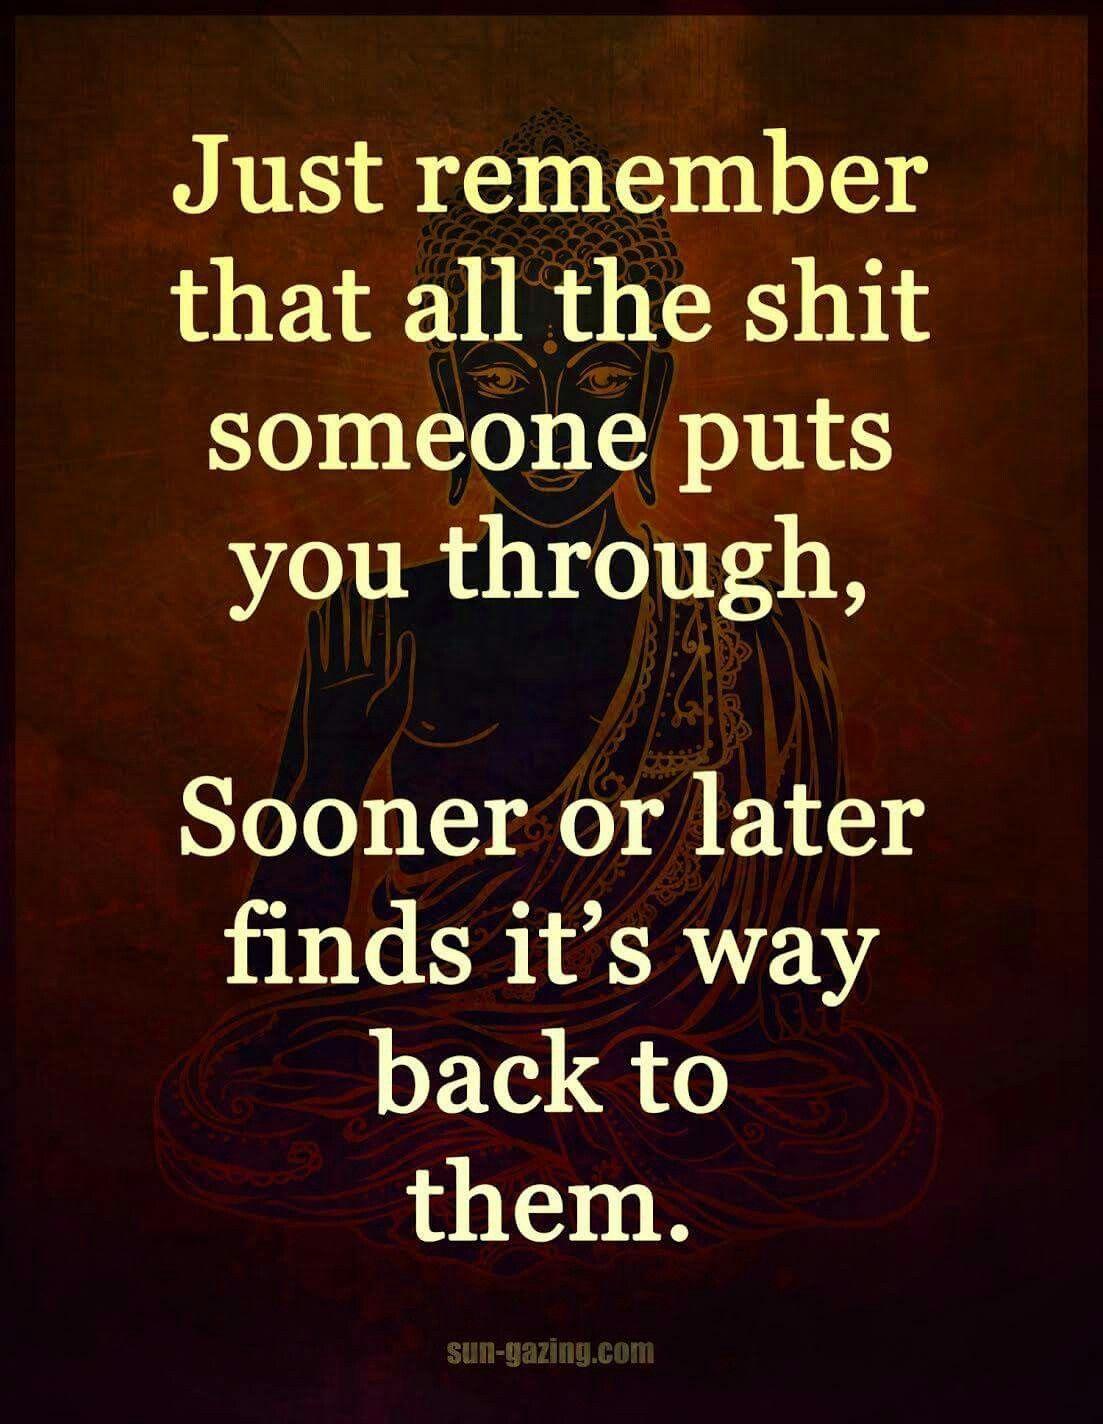 Just remember that all the shit someone puts you through, Sooner or